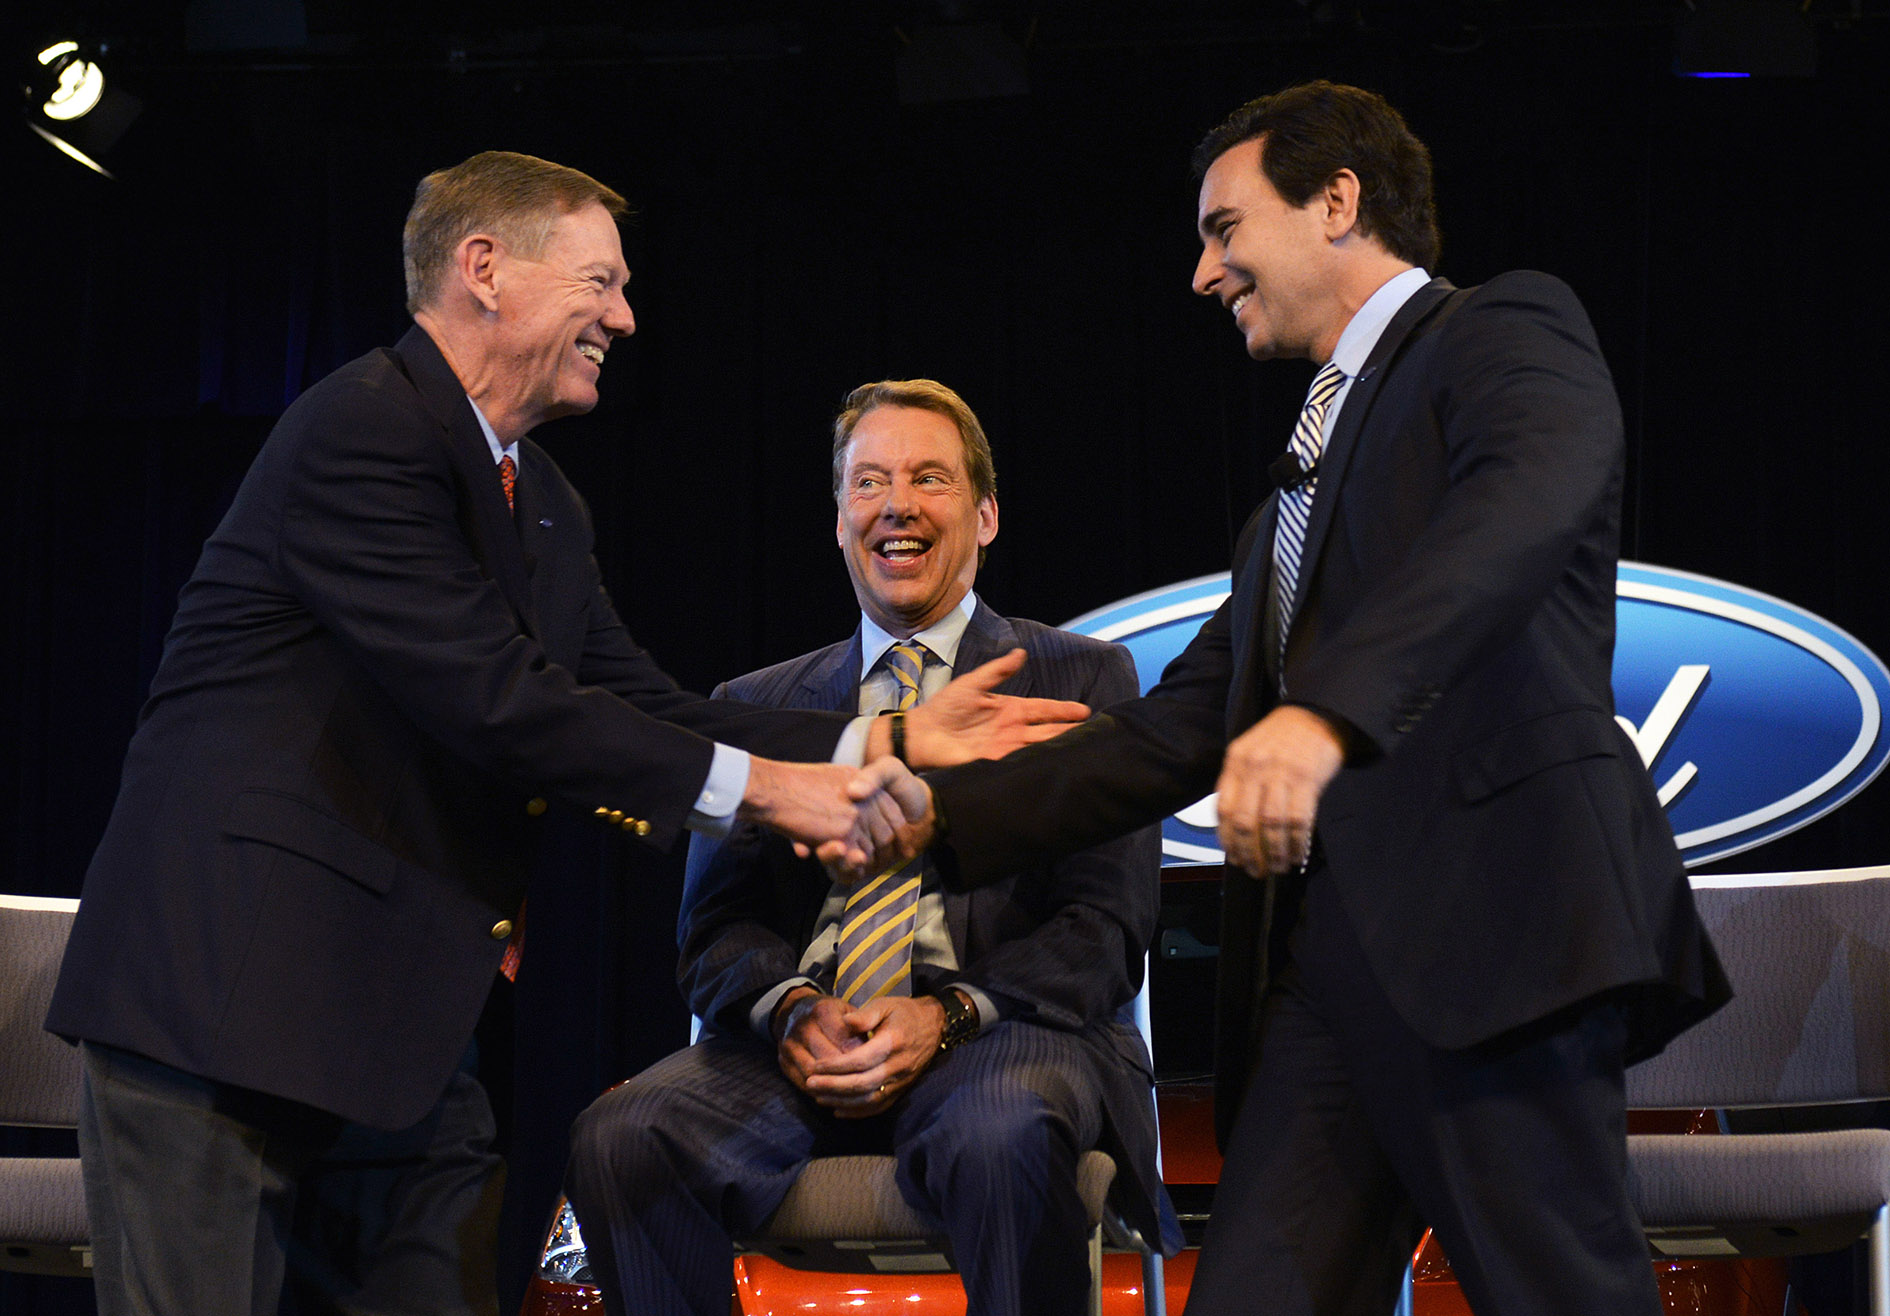 Alan Mulally Retiring July 1; Mark Fields Named President and CE